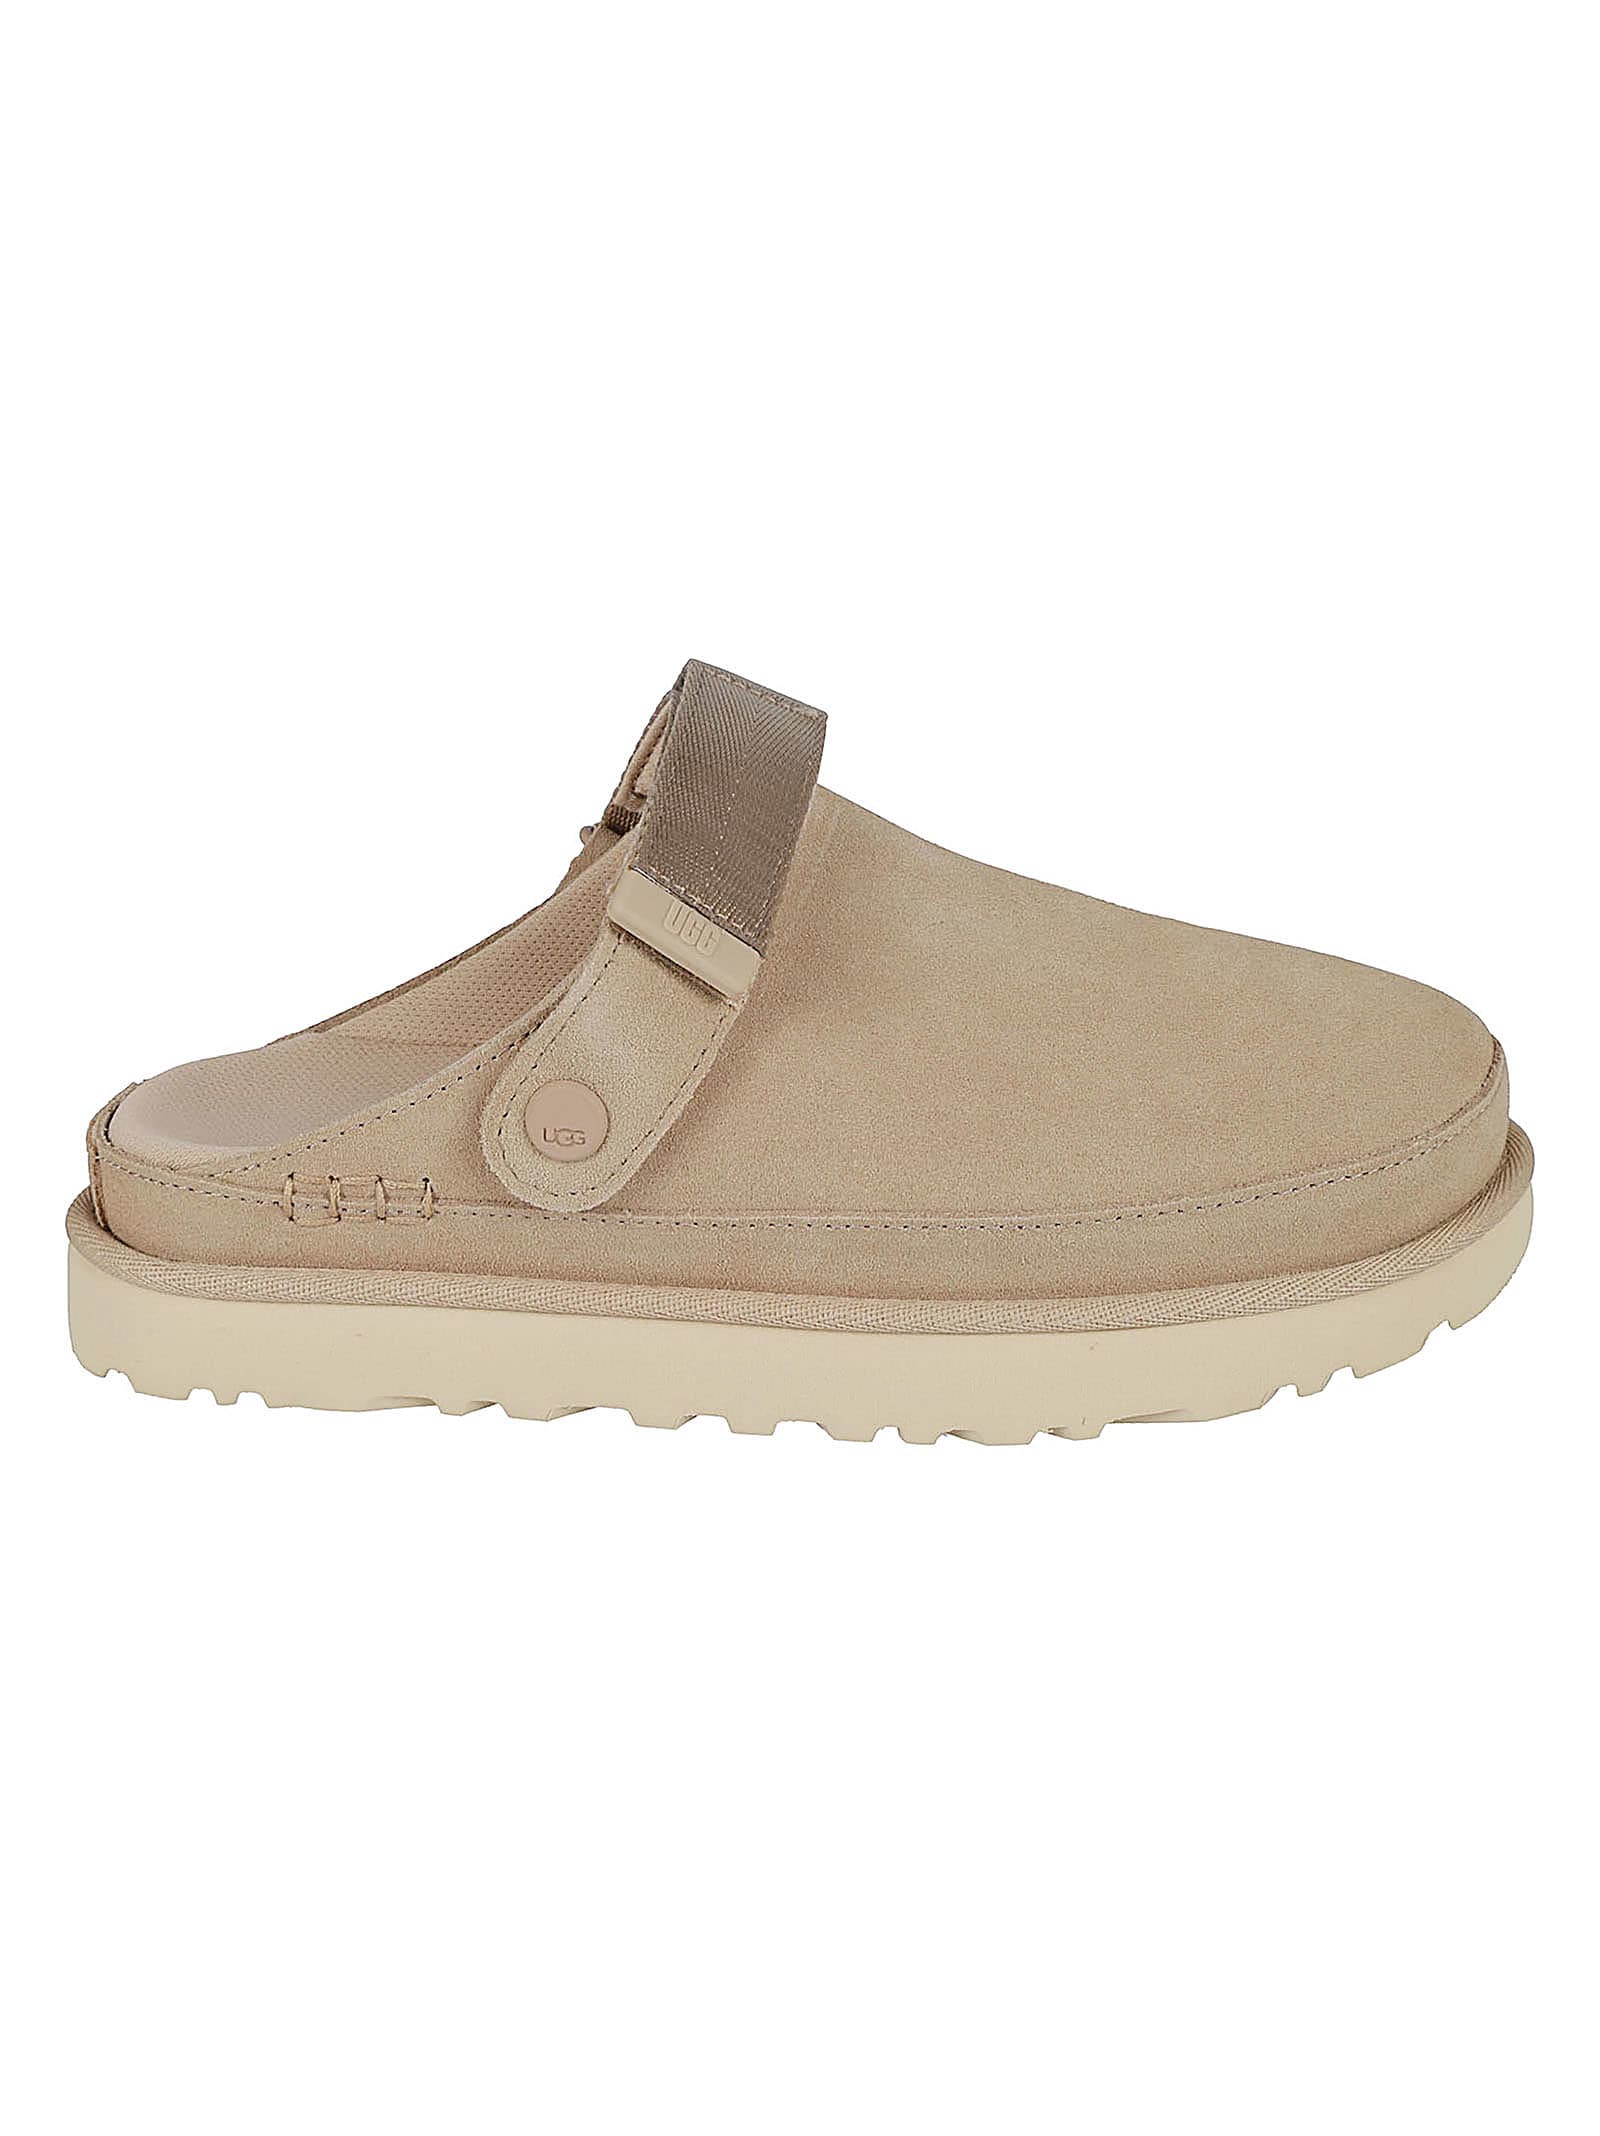 Shop Ugg Clog Mules In Driftwood